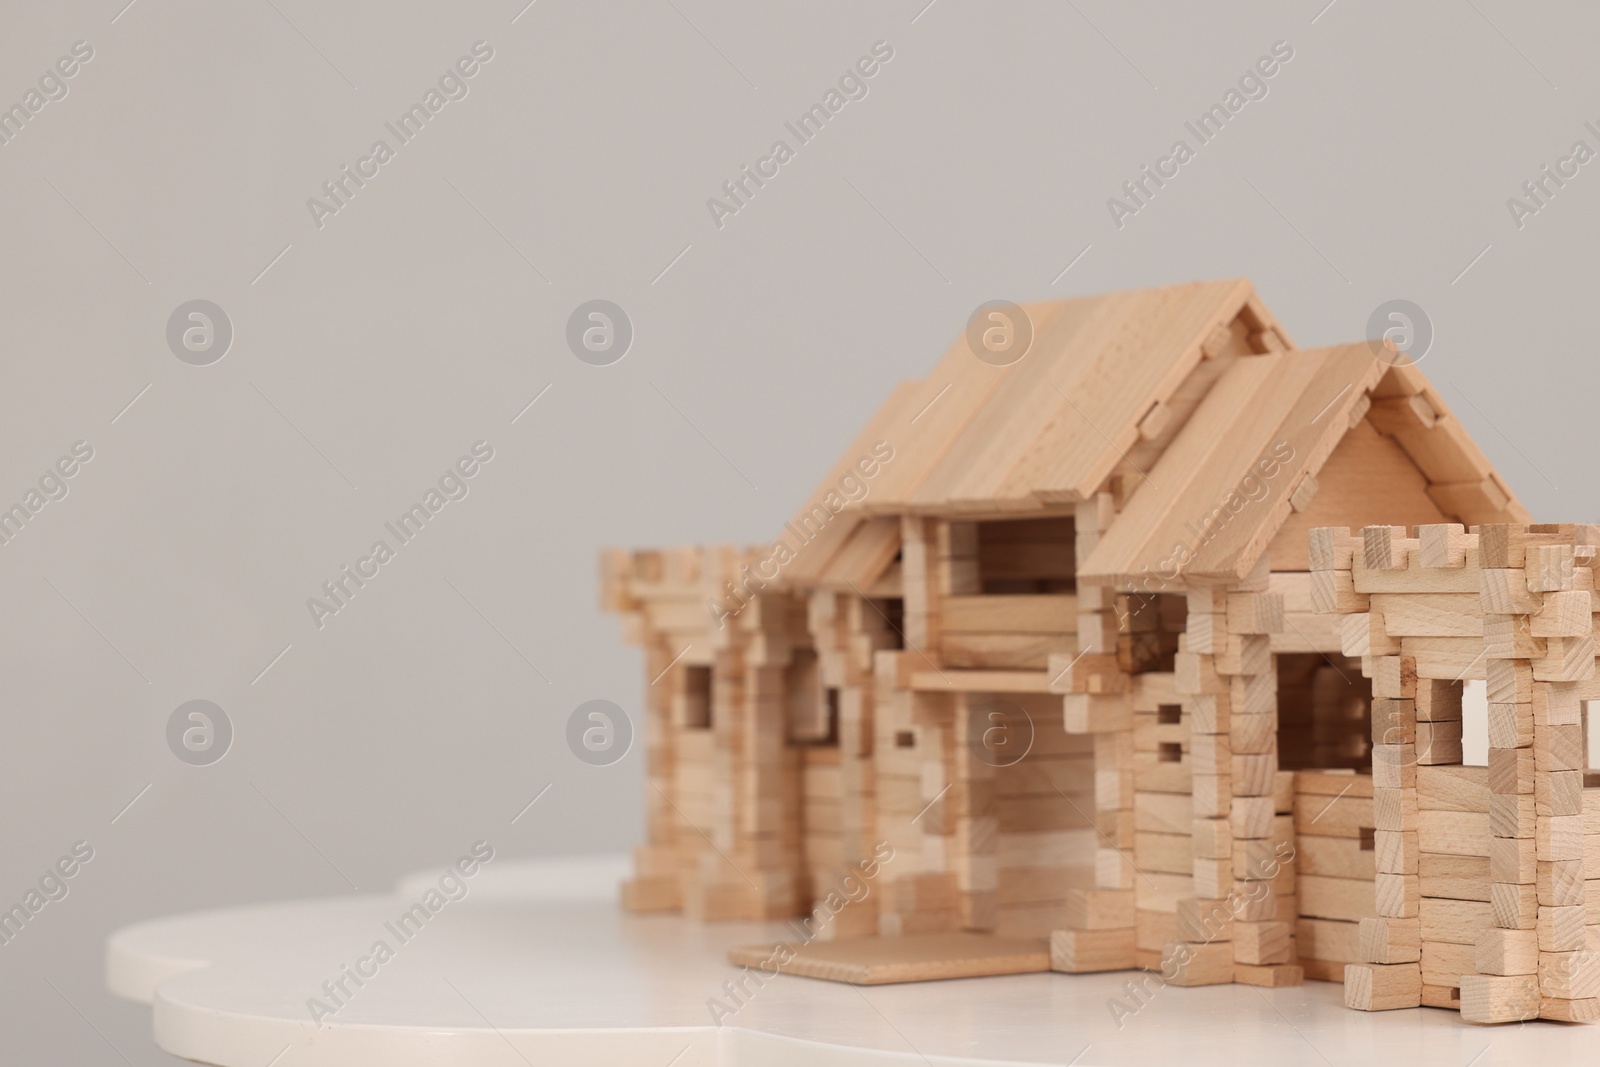 Photo of Wooden entry gate on table against light background, space for text. Children's toy